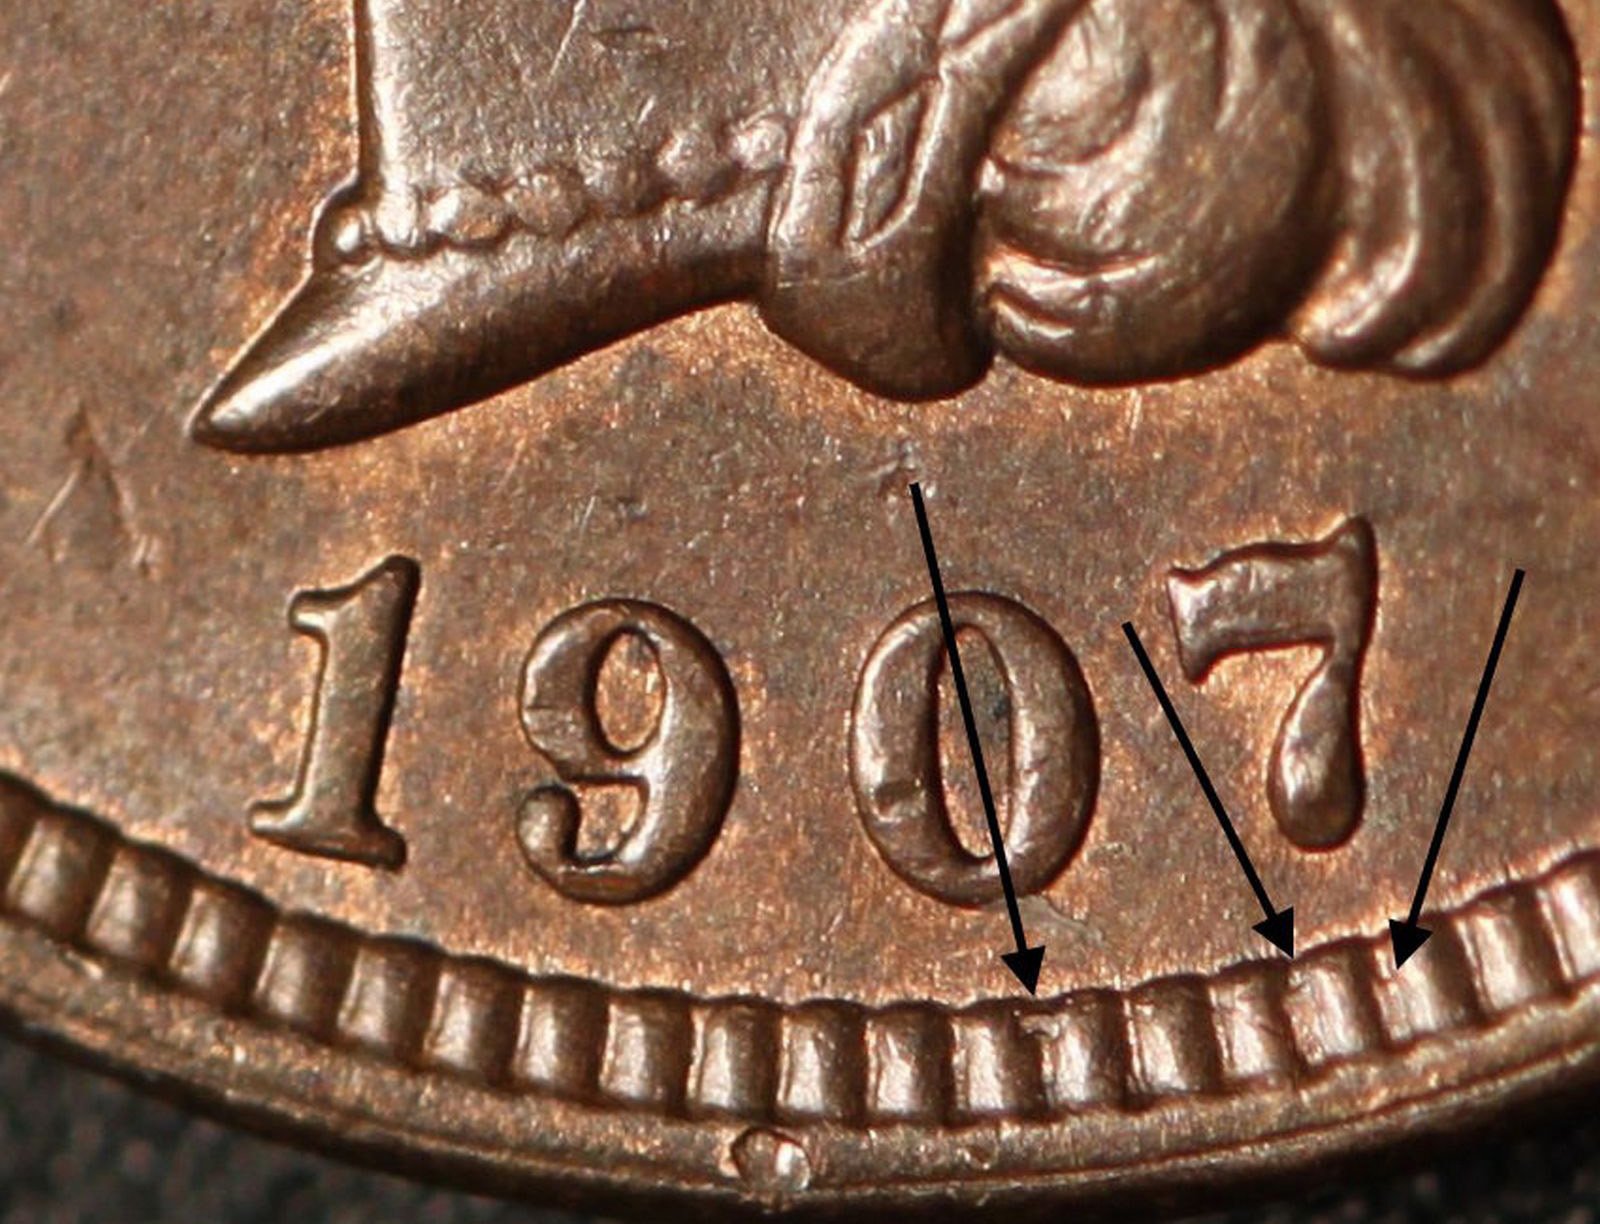 1907 MPD-007 - Indian Head Penny - Photo by Ed Nathanson